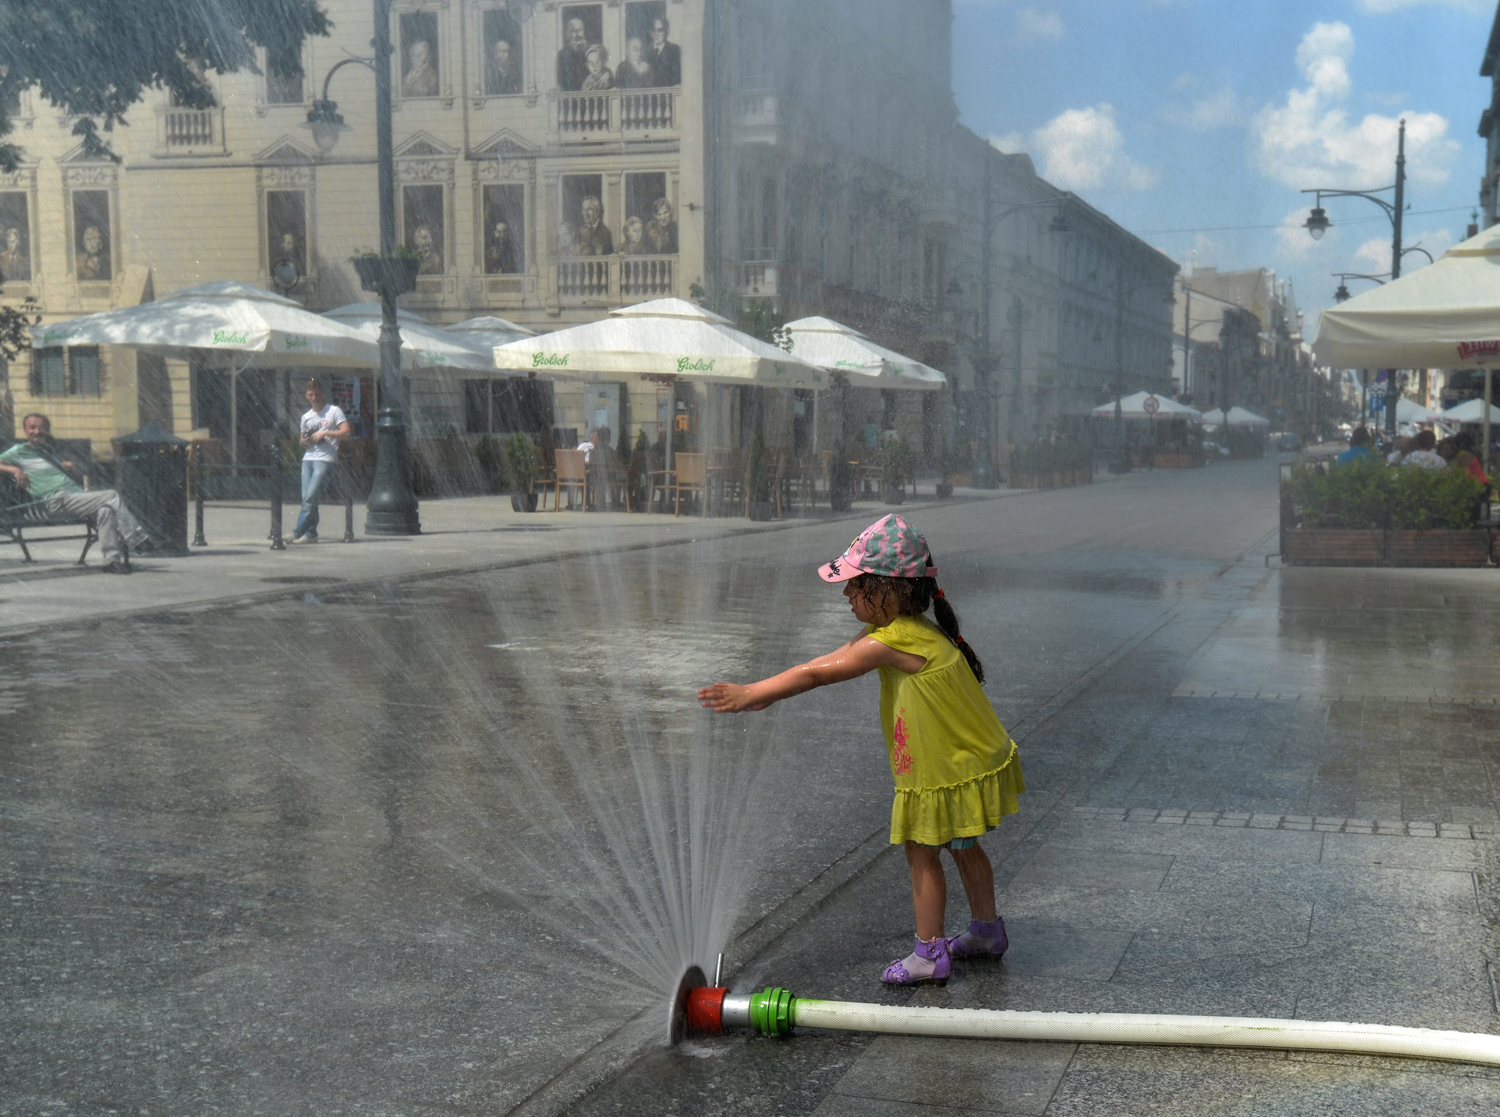 A girl plays with the water curtains that have been installed by firemen to bring relief to local people suffering from scorching heat on Piotrowska Street in Lodz, Poland on May 24, 2014.